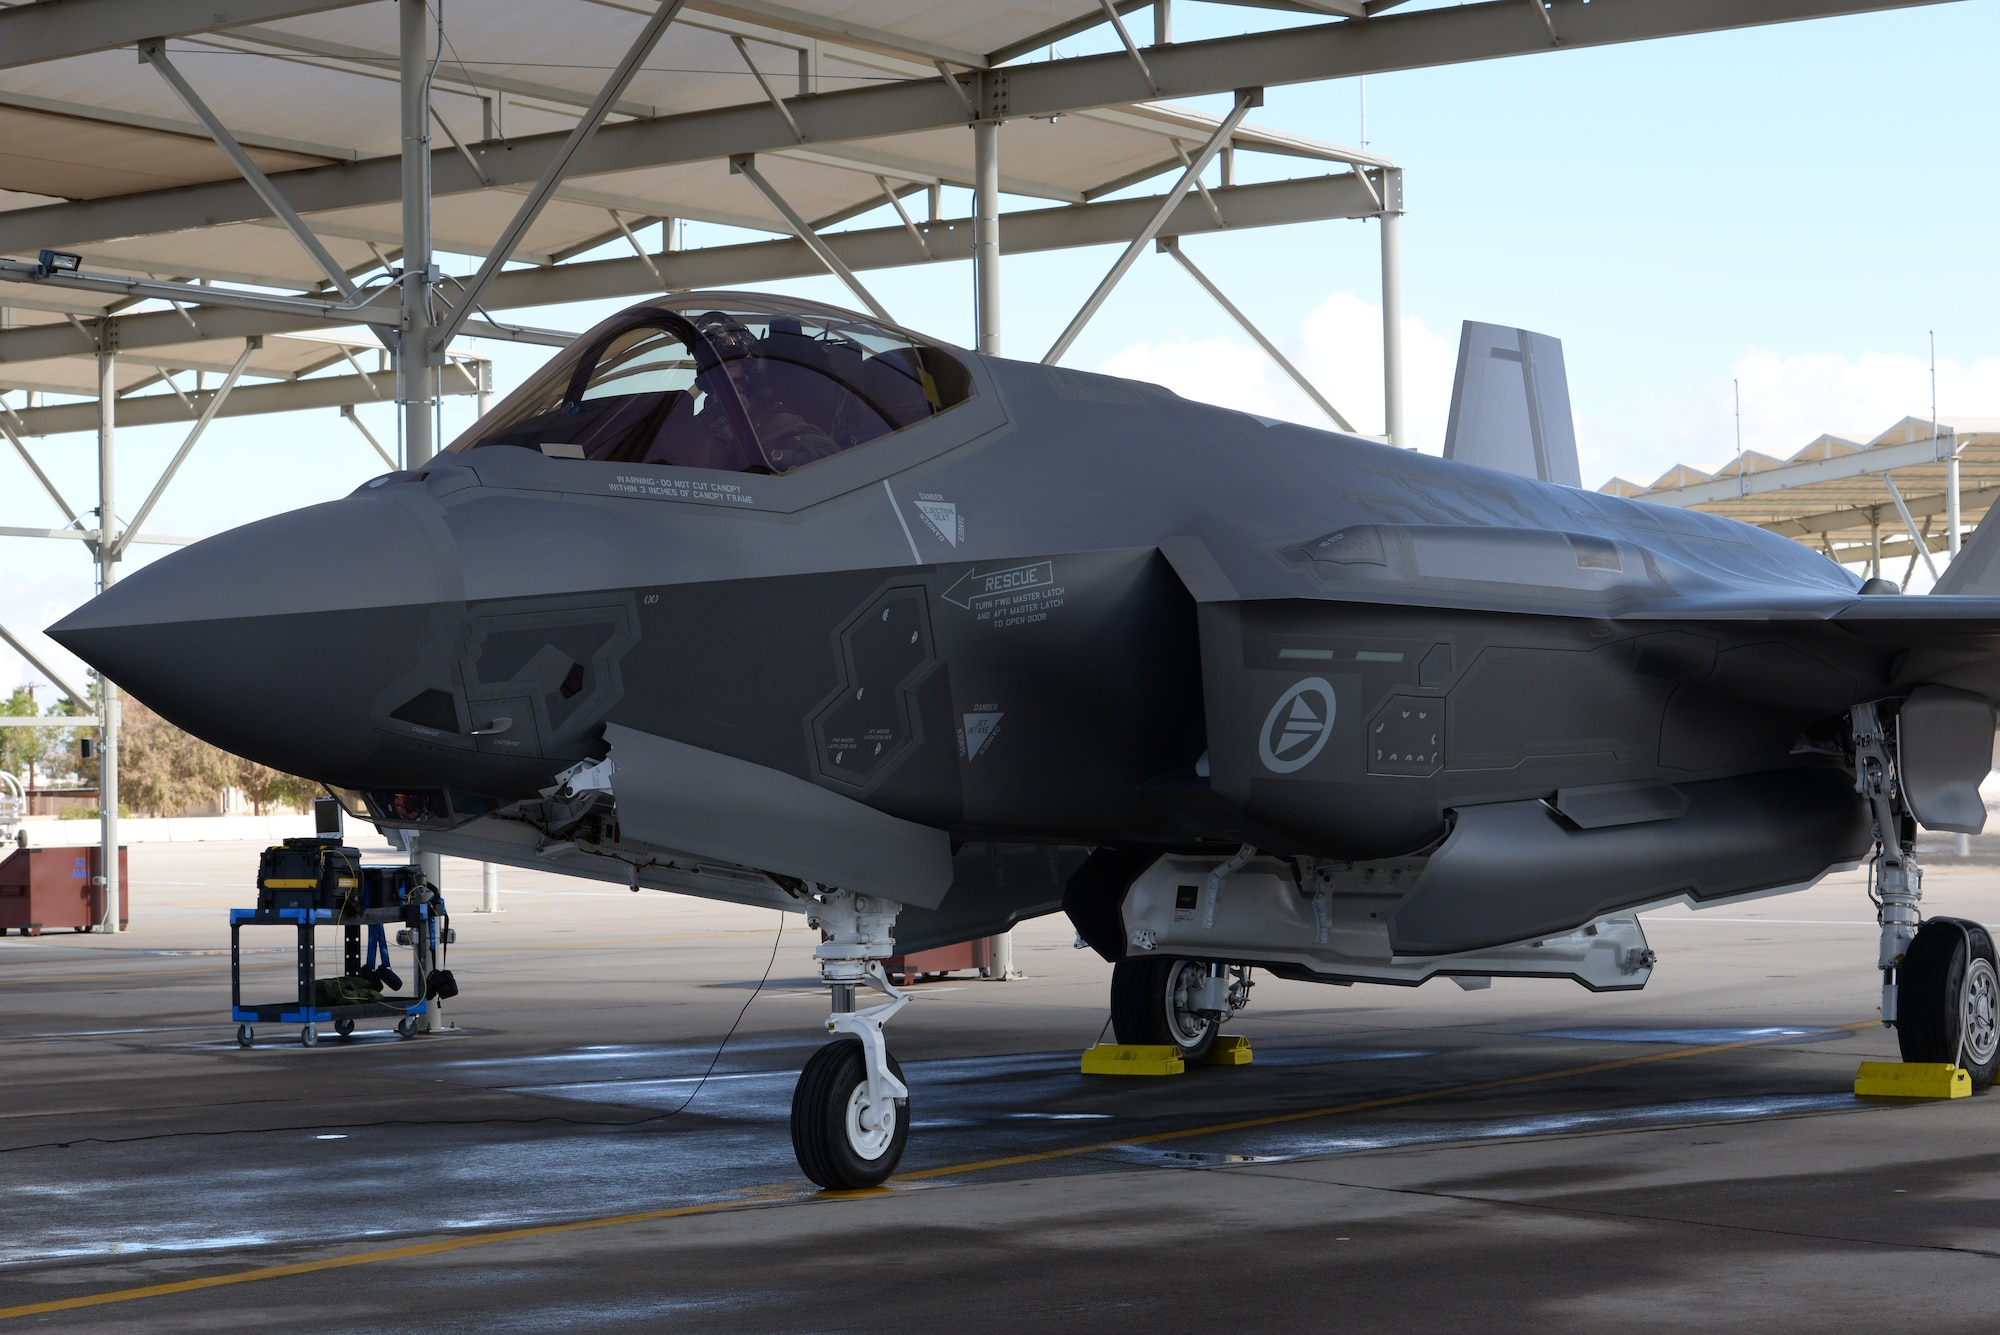 Norwegian Maj. Morten Hanche, 62nd Fighter Squadron F-35 student pilot, prepares to taxi his Norwegian F-35 out onto the runway for takeoff, Dec. 14, 2015, at Luke Air Force Base. This F-35 is one of the first two F-35s that have been produced specifically to meet the needs of the Norwegian Royal Air Force. (U.S. Air Force photo by Airman 1st Class Ridge Shan)